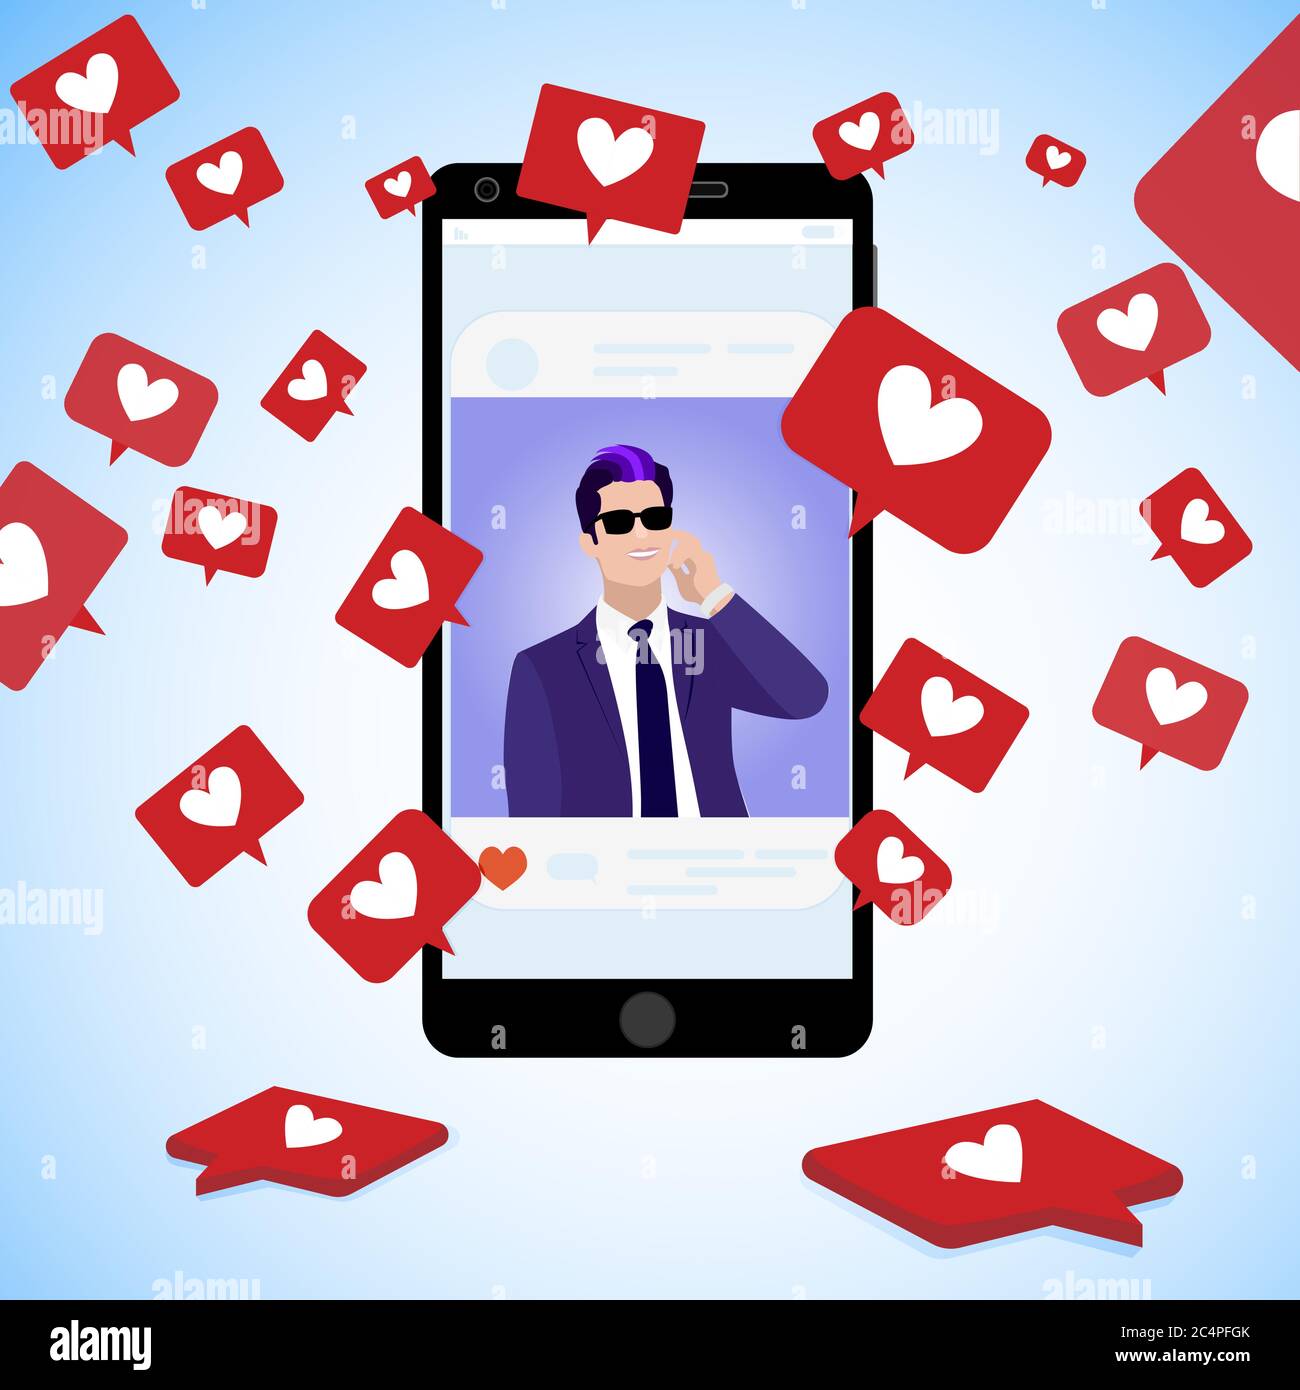 Famous blogger post, collect social icons red hearts, communication online using social media, handsome man page popular catch popularity. Vector illu Stock Vector